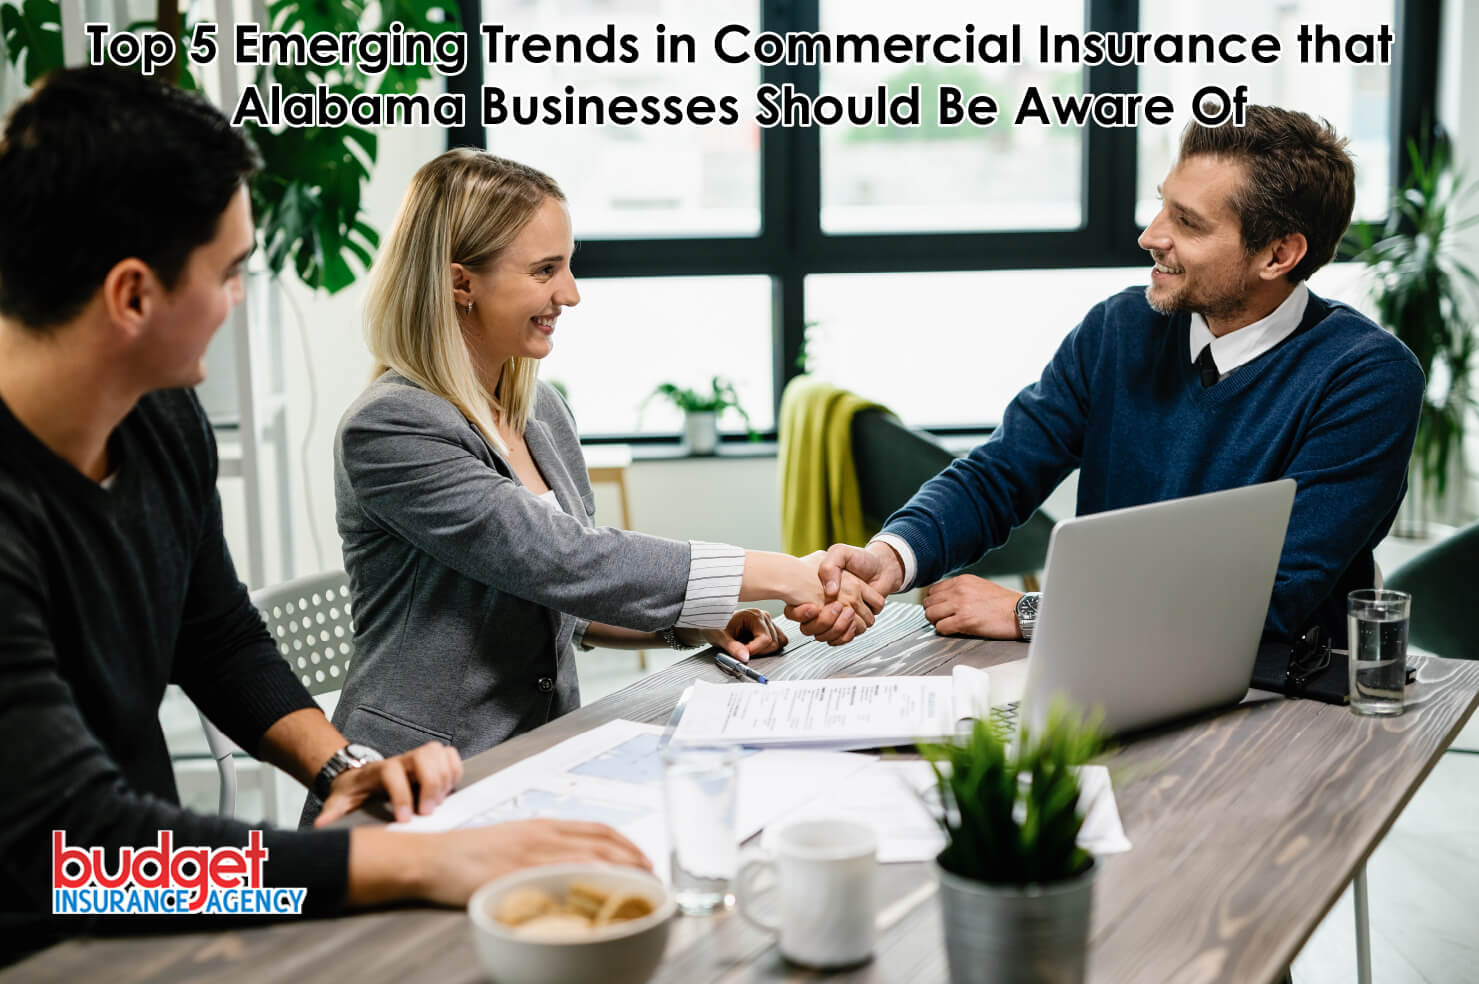 Top 5 Emerging Trends in Commercial Insurance that Alabama Businesses Should Be Aware Of